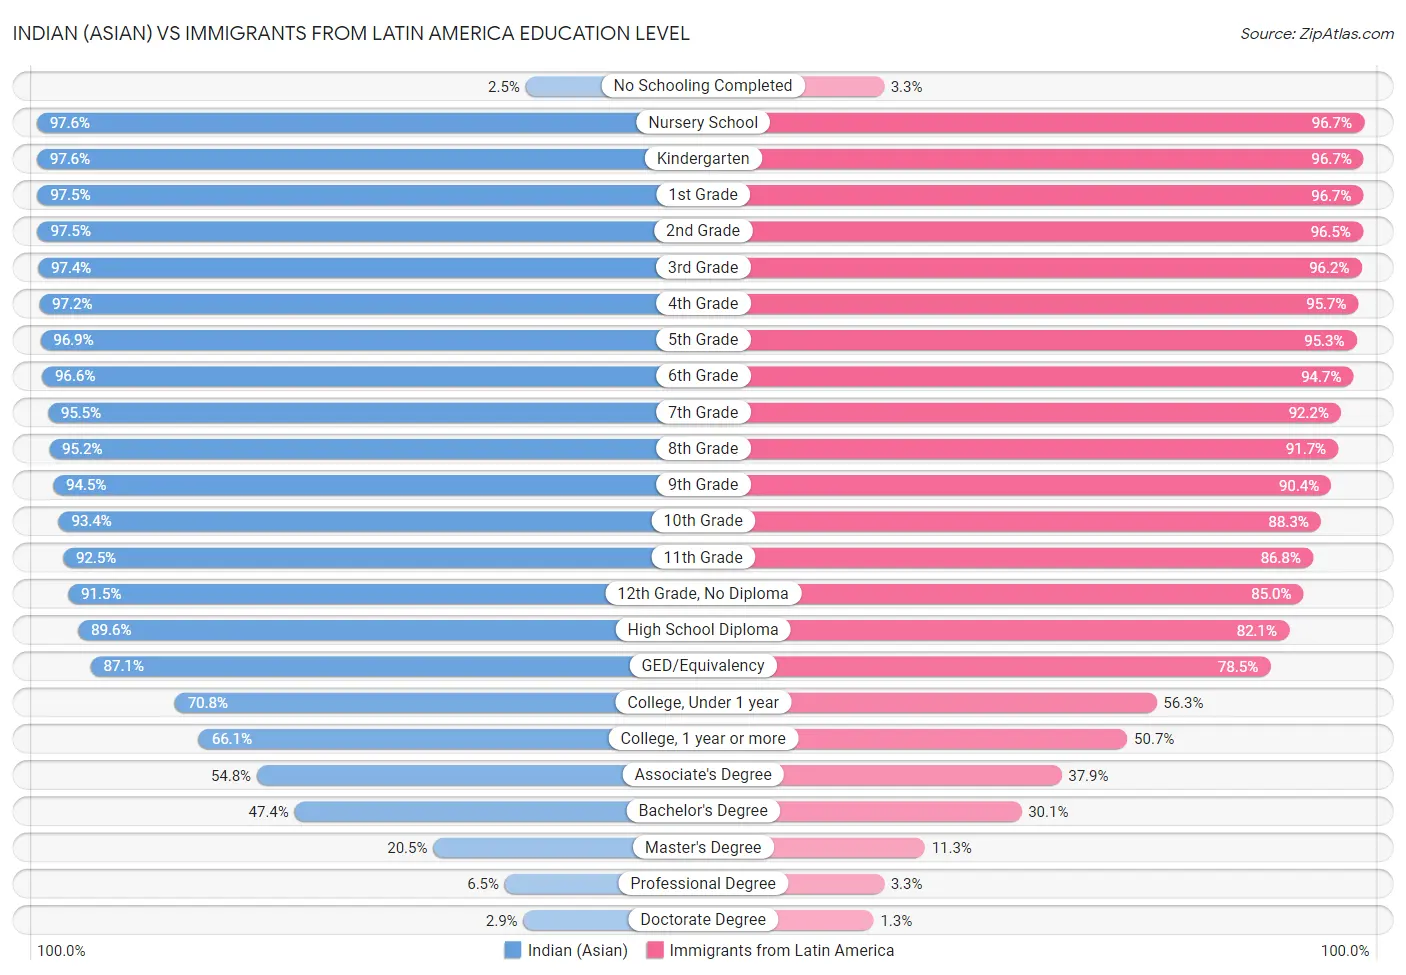 Indian (Asian) vs Immigrants from Latin America Education Level